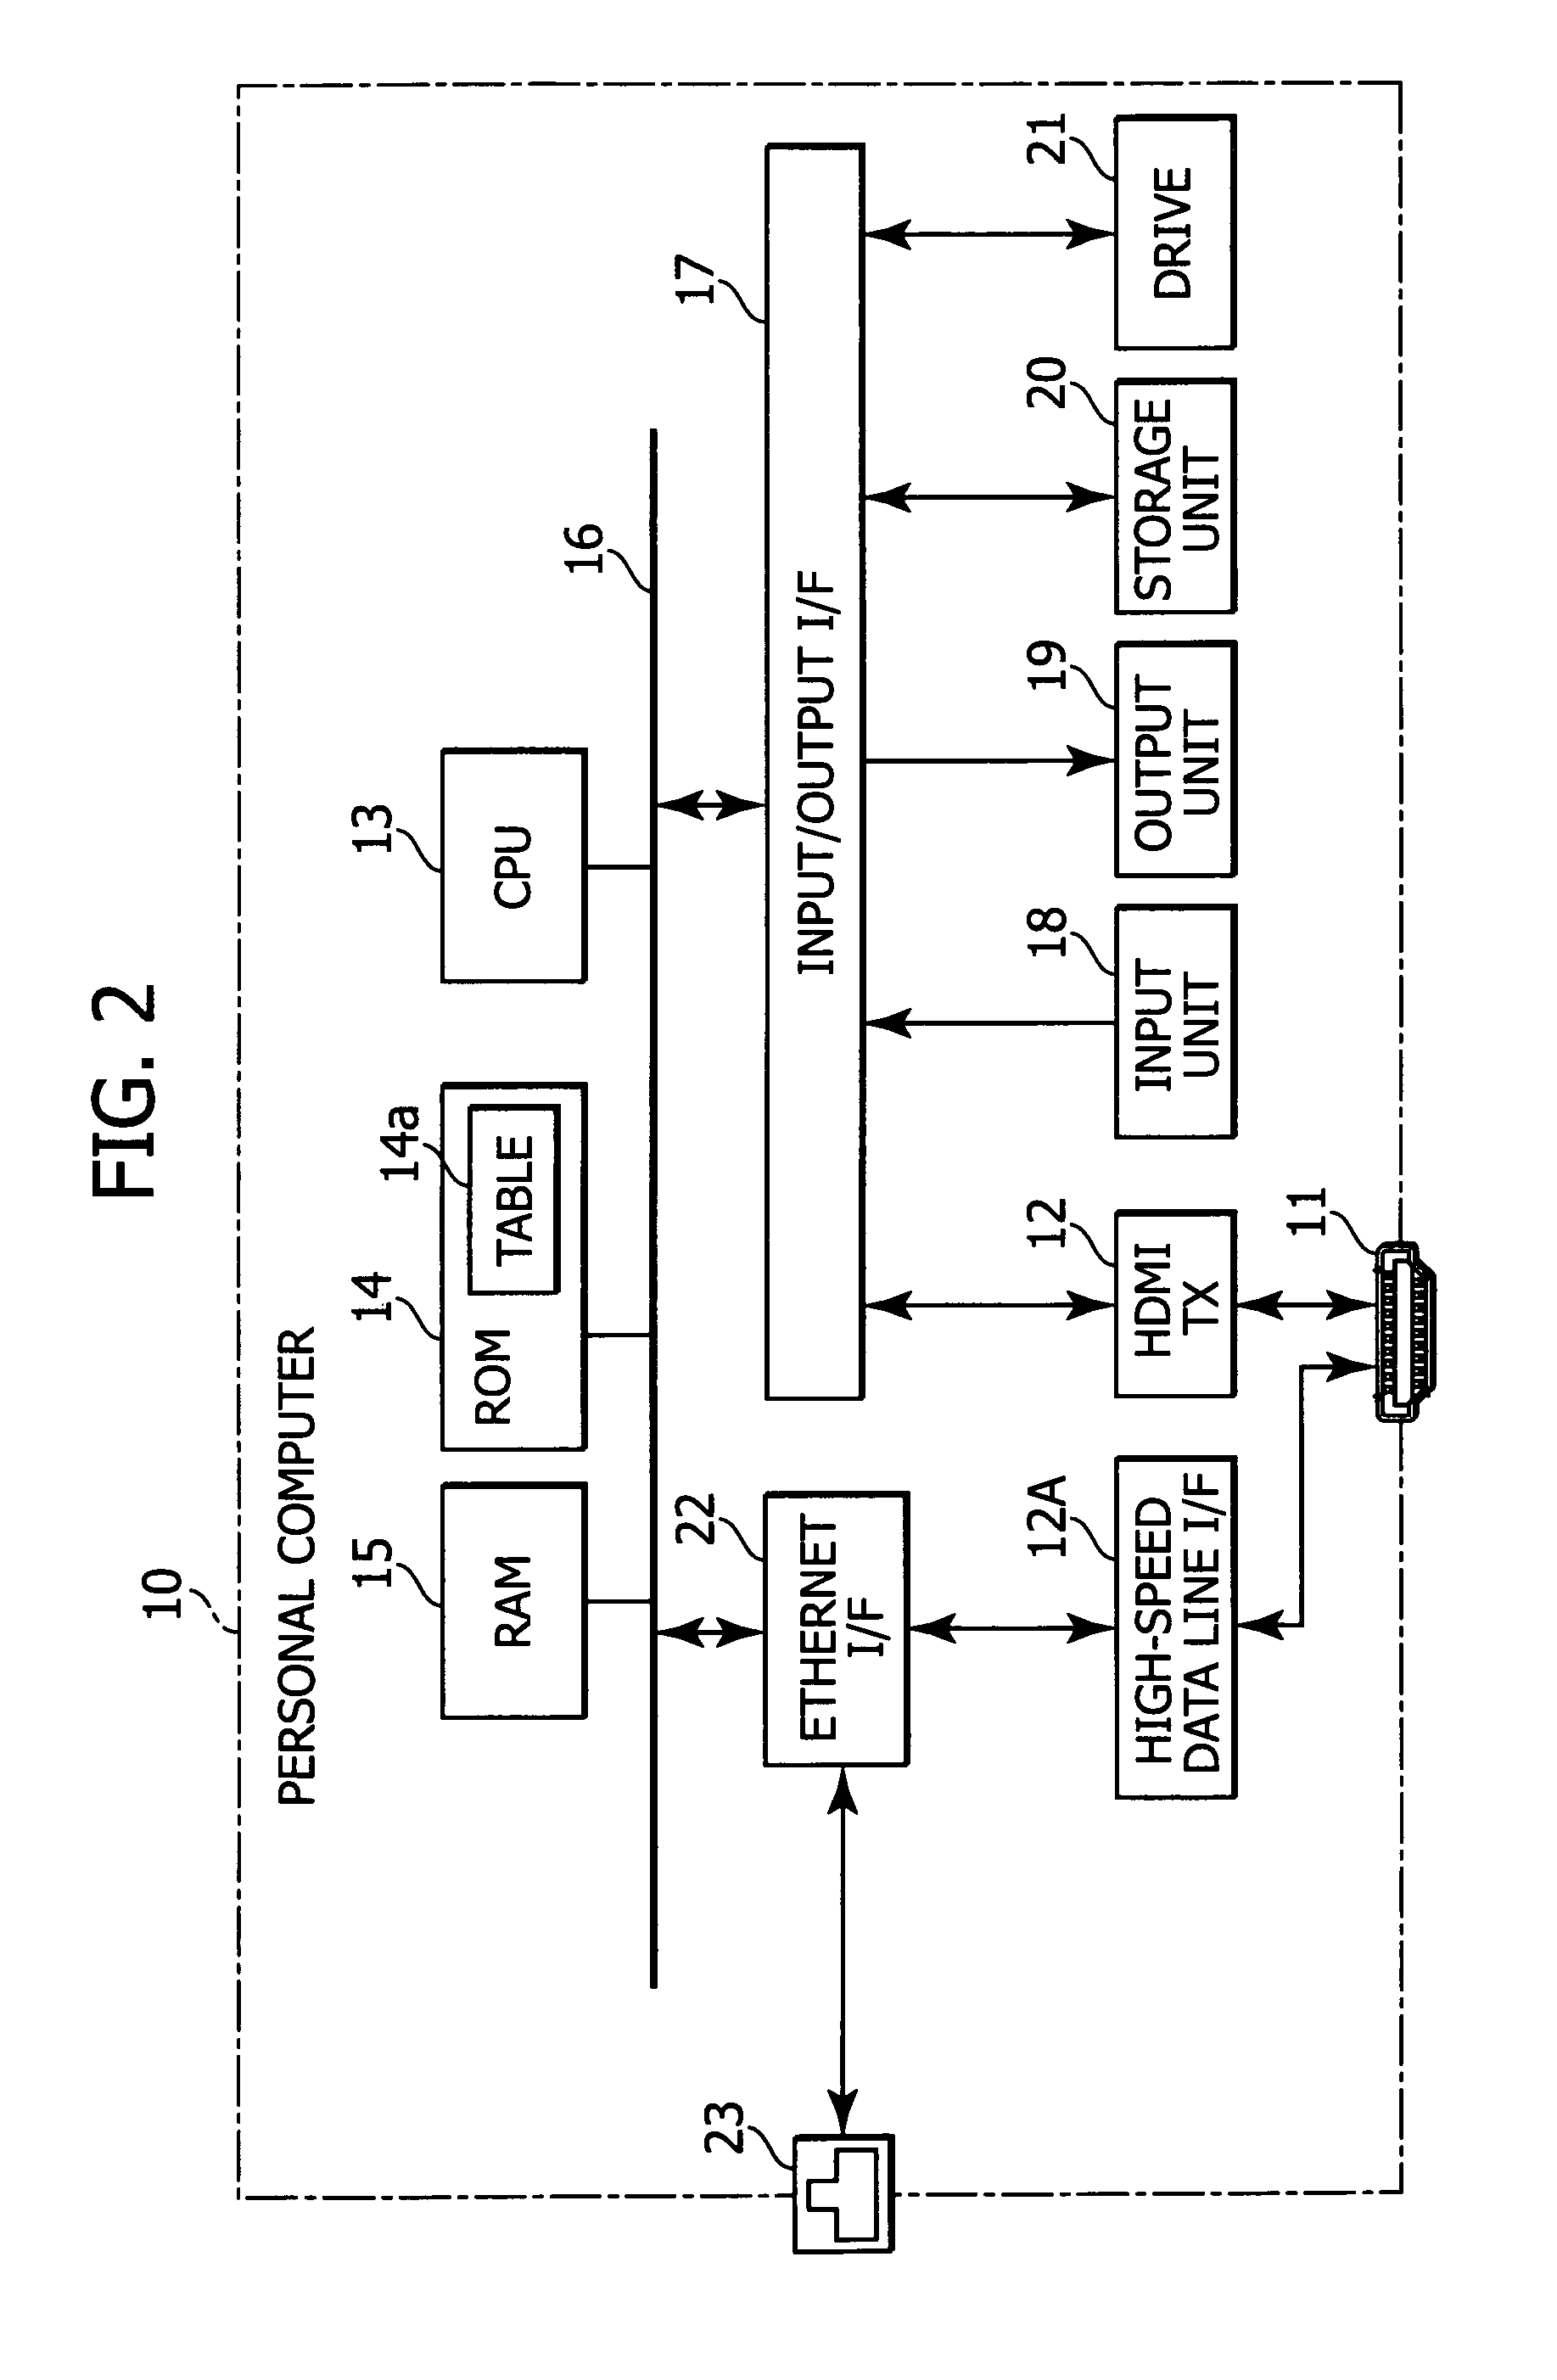 Display device and transmitting device